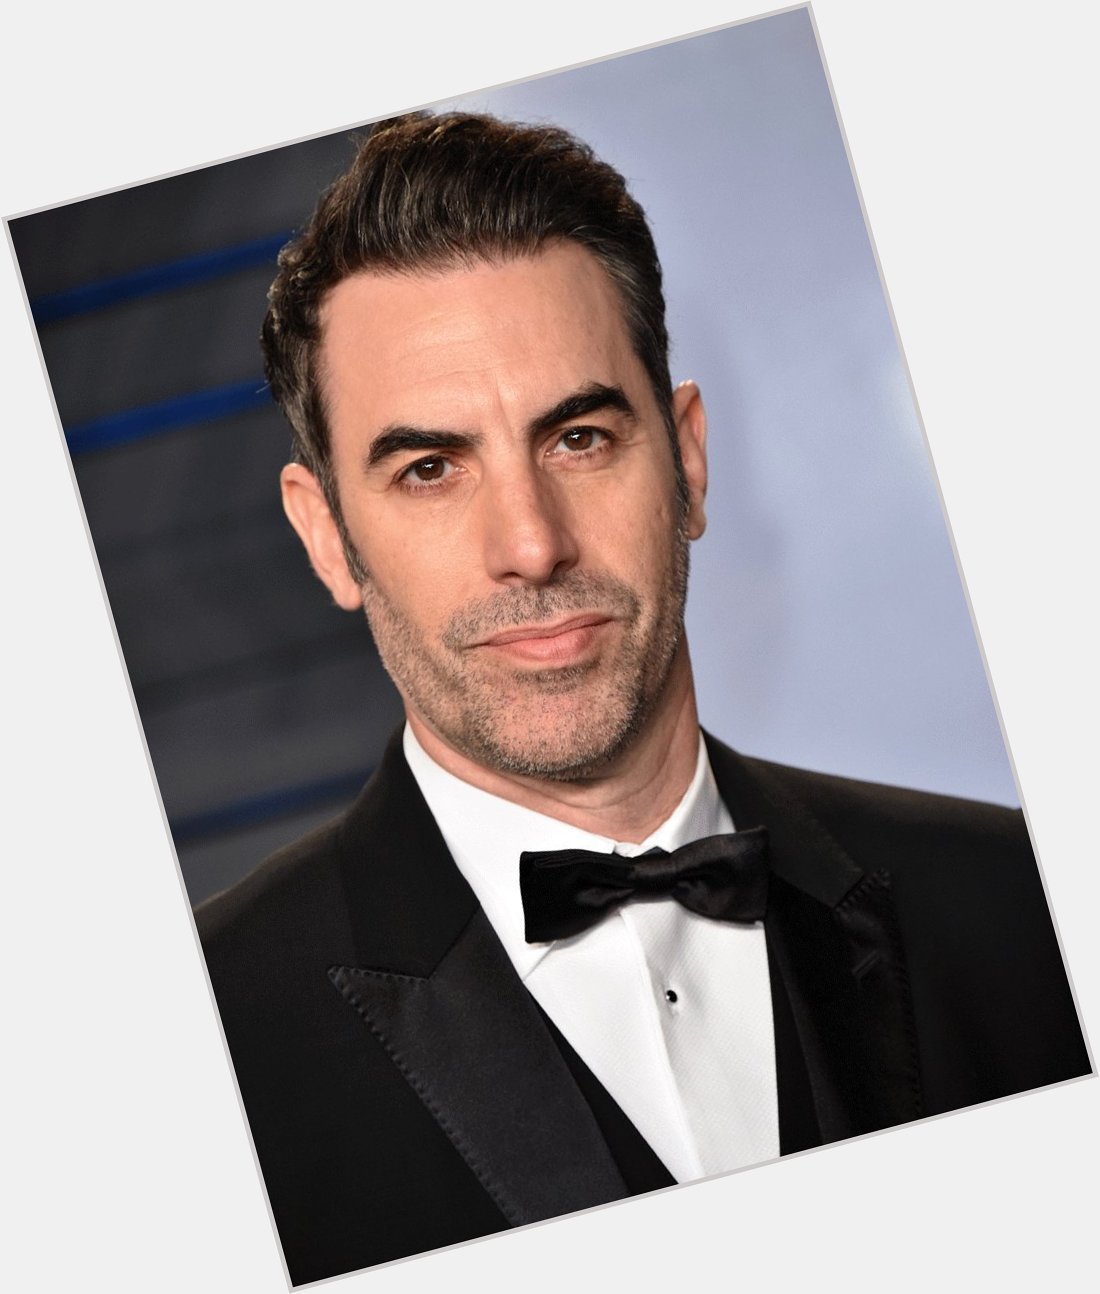 Happy 48th Birthday to Sacha Baron Cohen!

Can\t believe Ali G is nearly 50. 